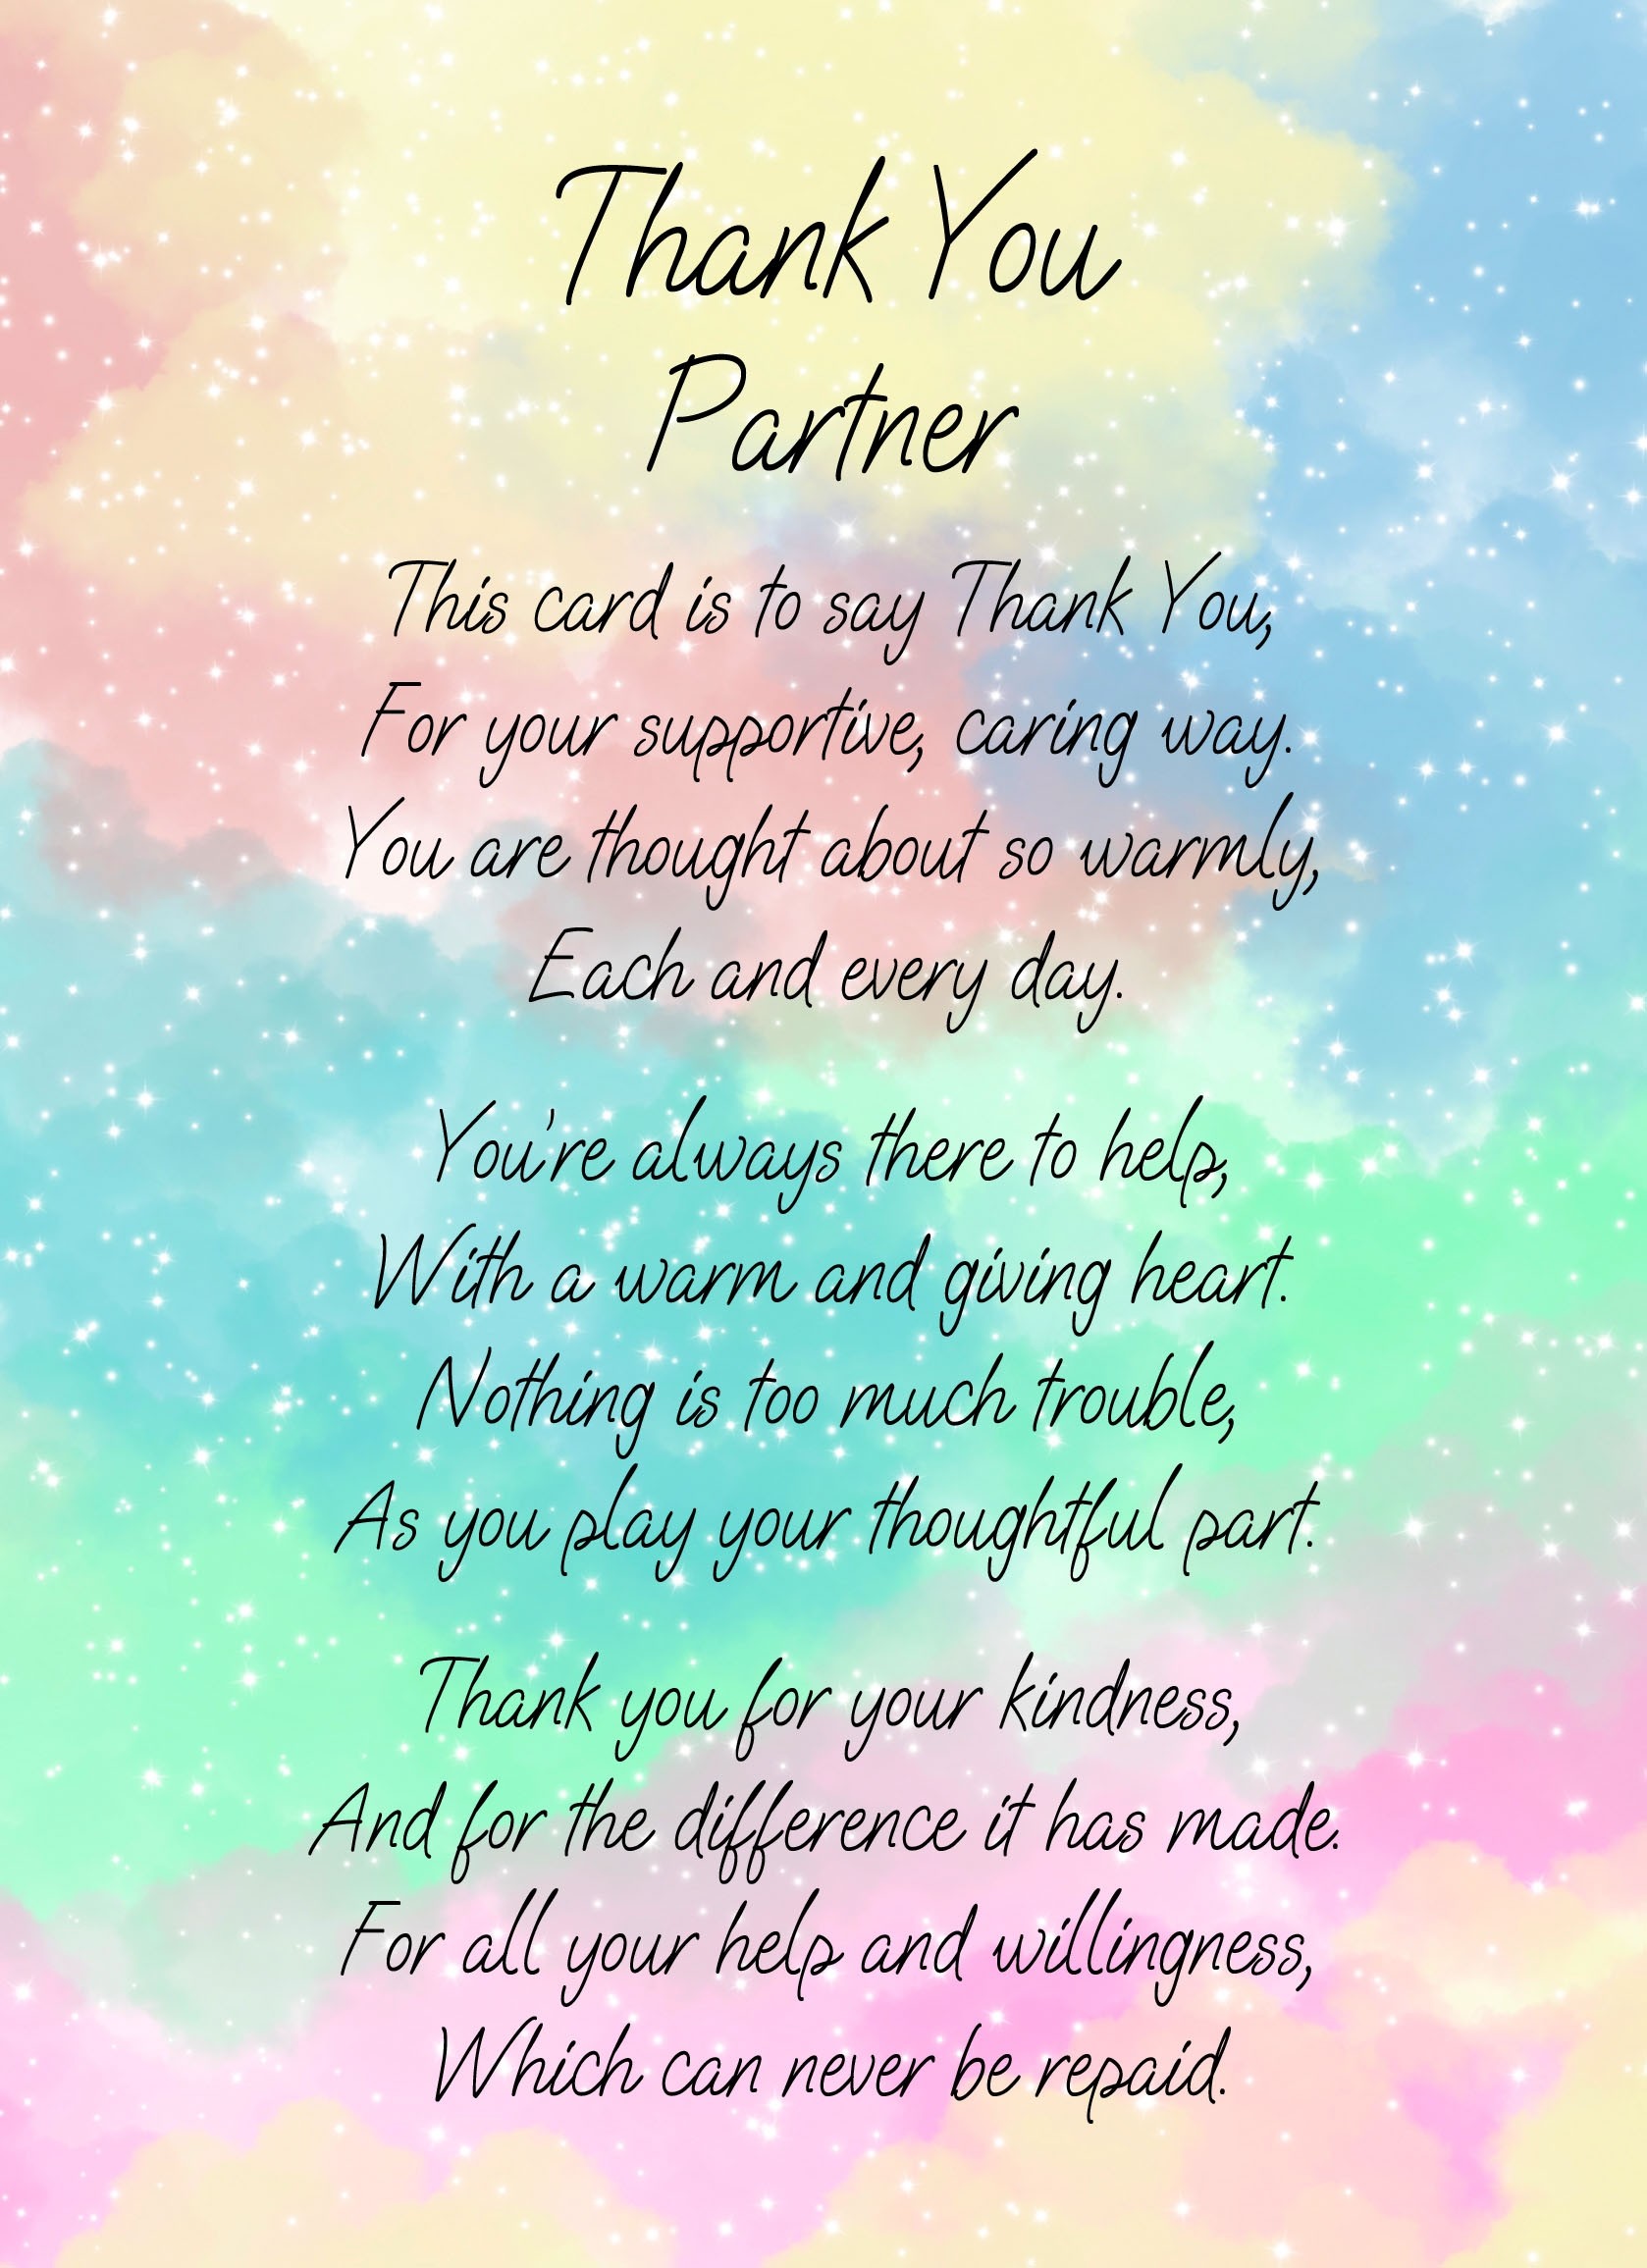 Thank You Poem Verse Card For Partner